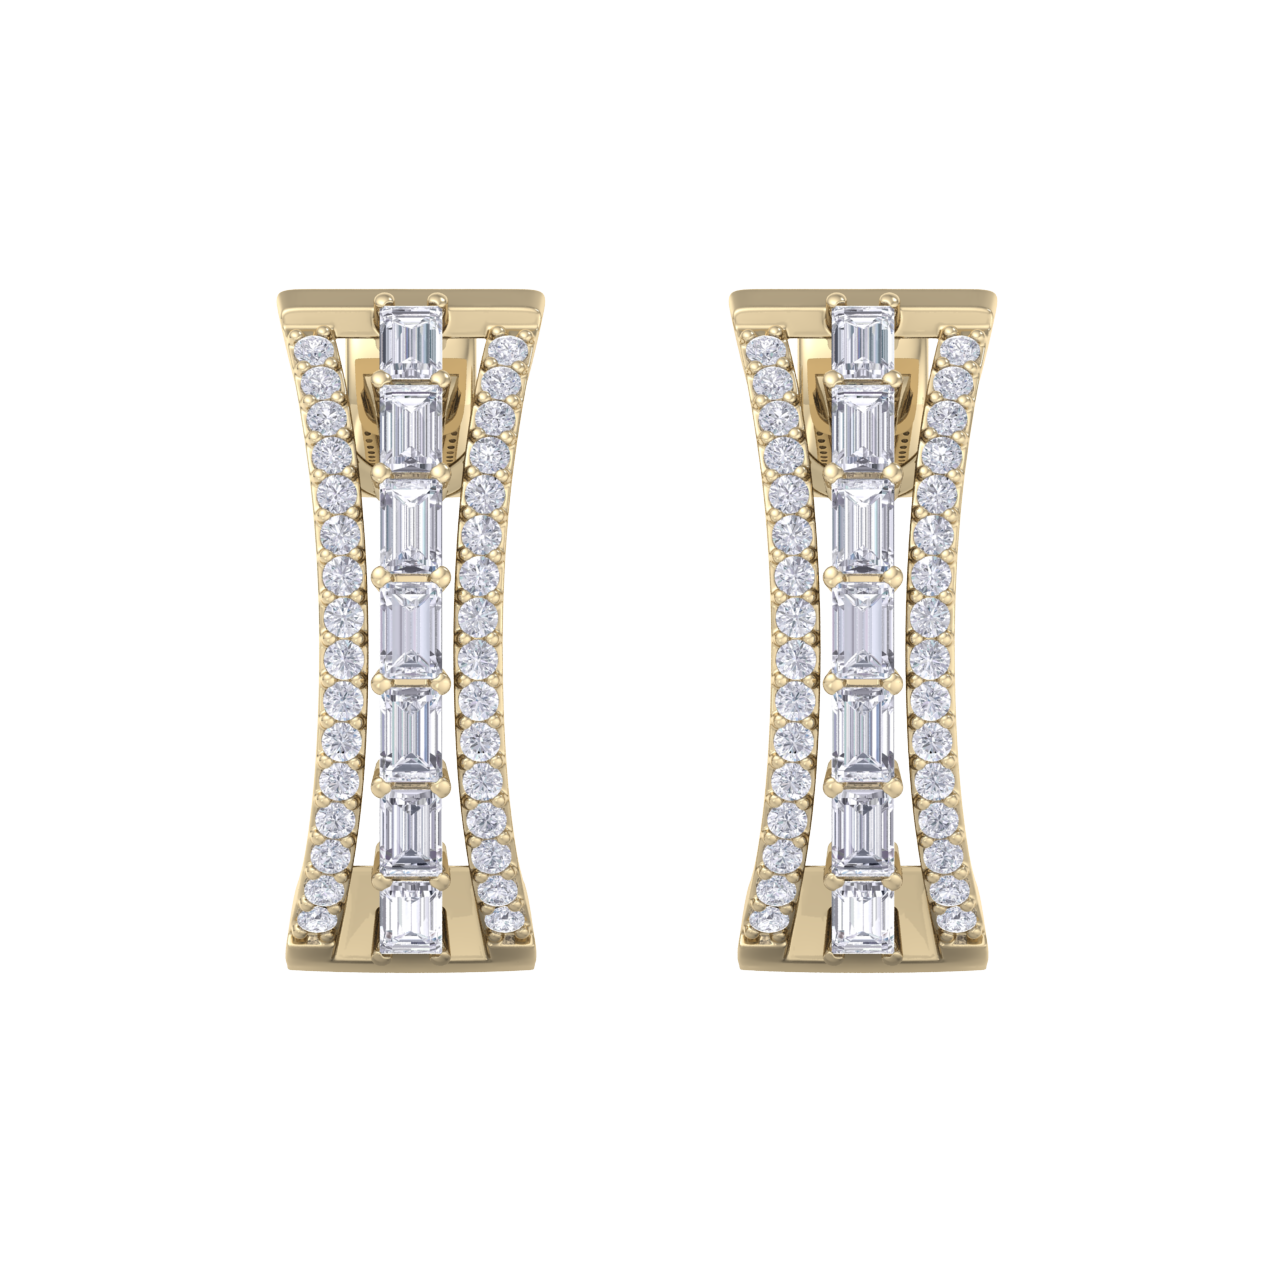 Diamond earrings in yellow gold with white diamonds of 1.13 ct in weight
